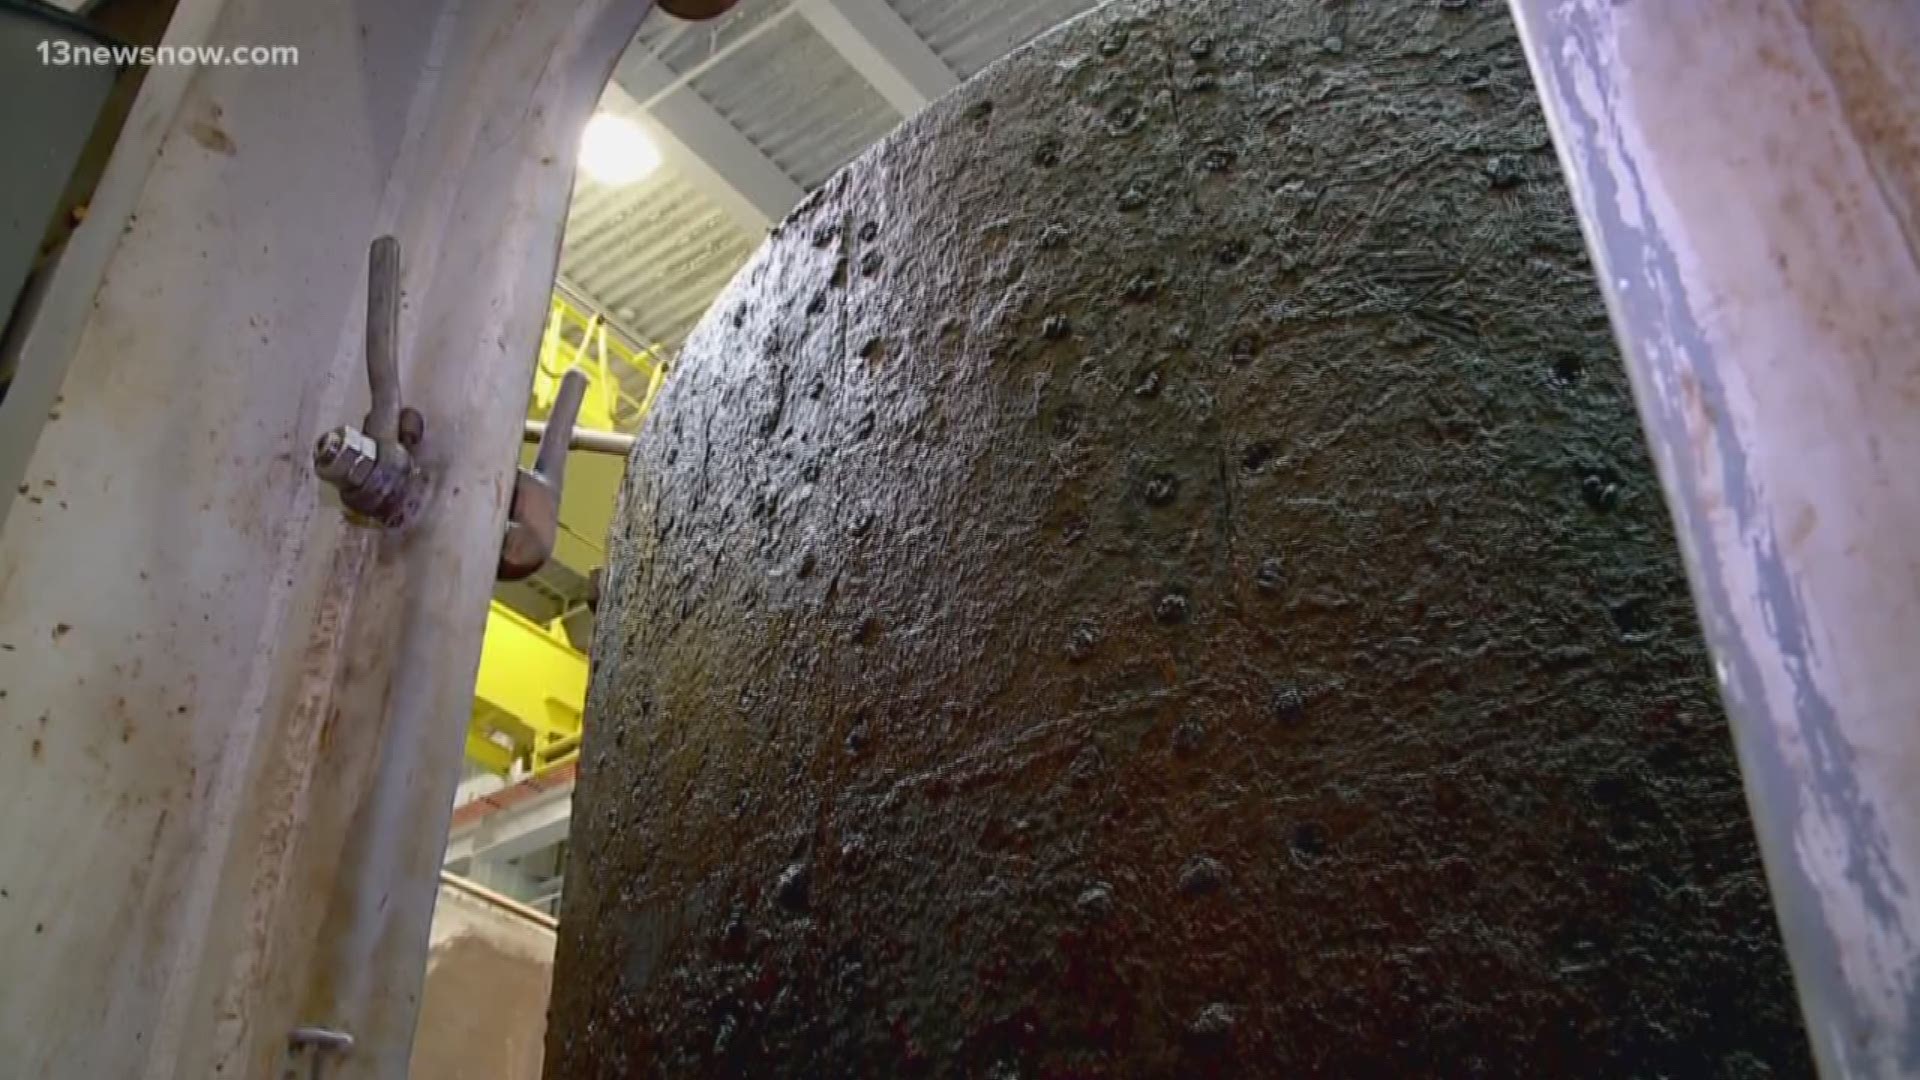 The Mariners' Museum and Park, NOAA and Newport News Shipbuilding are making progress in their restoration and conservation of the turret tower of the USS Monitor.